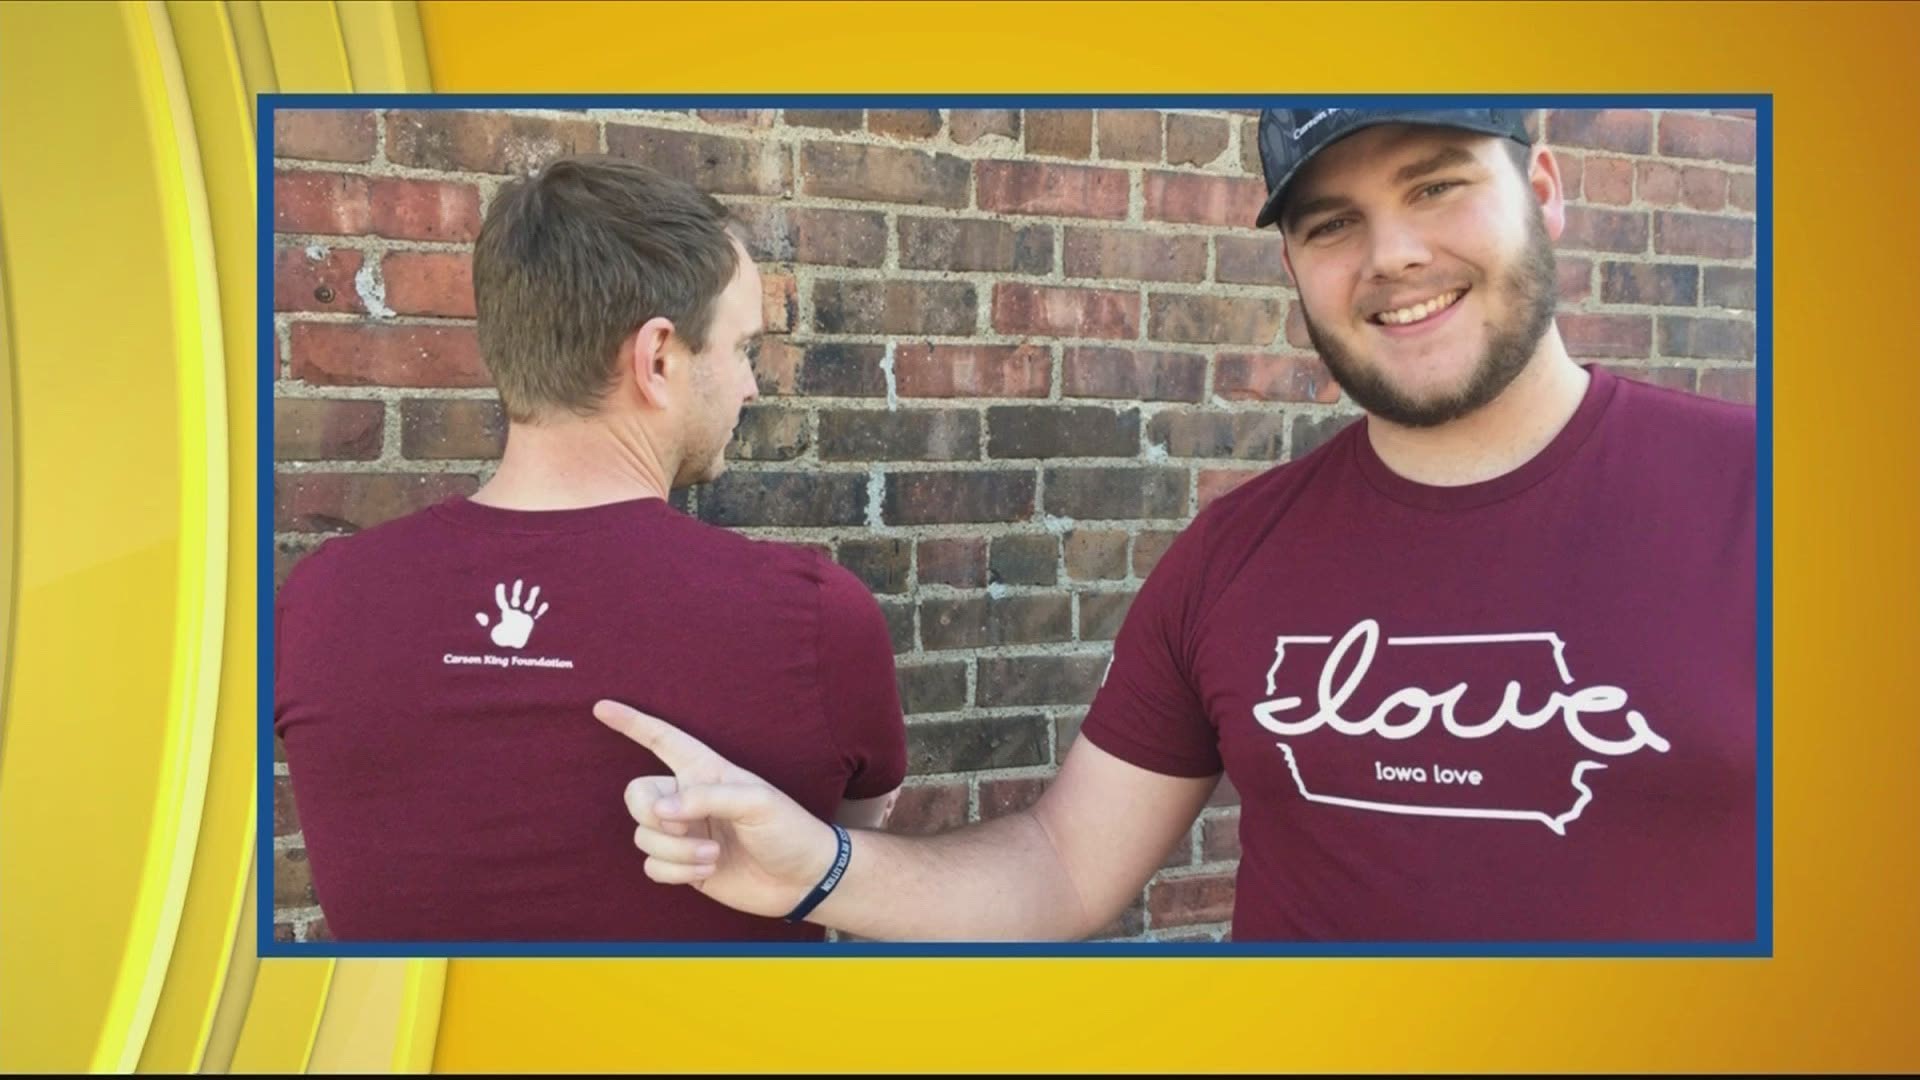 Carson King's Iowa Love shirts will benefit mental health services across the state of Iowa